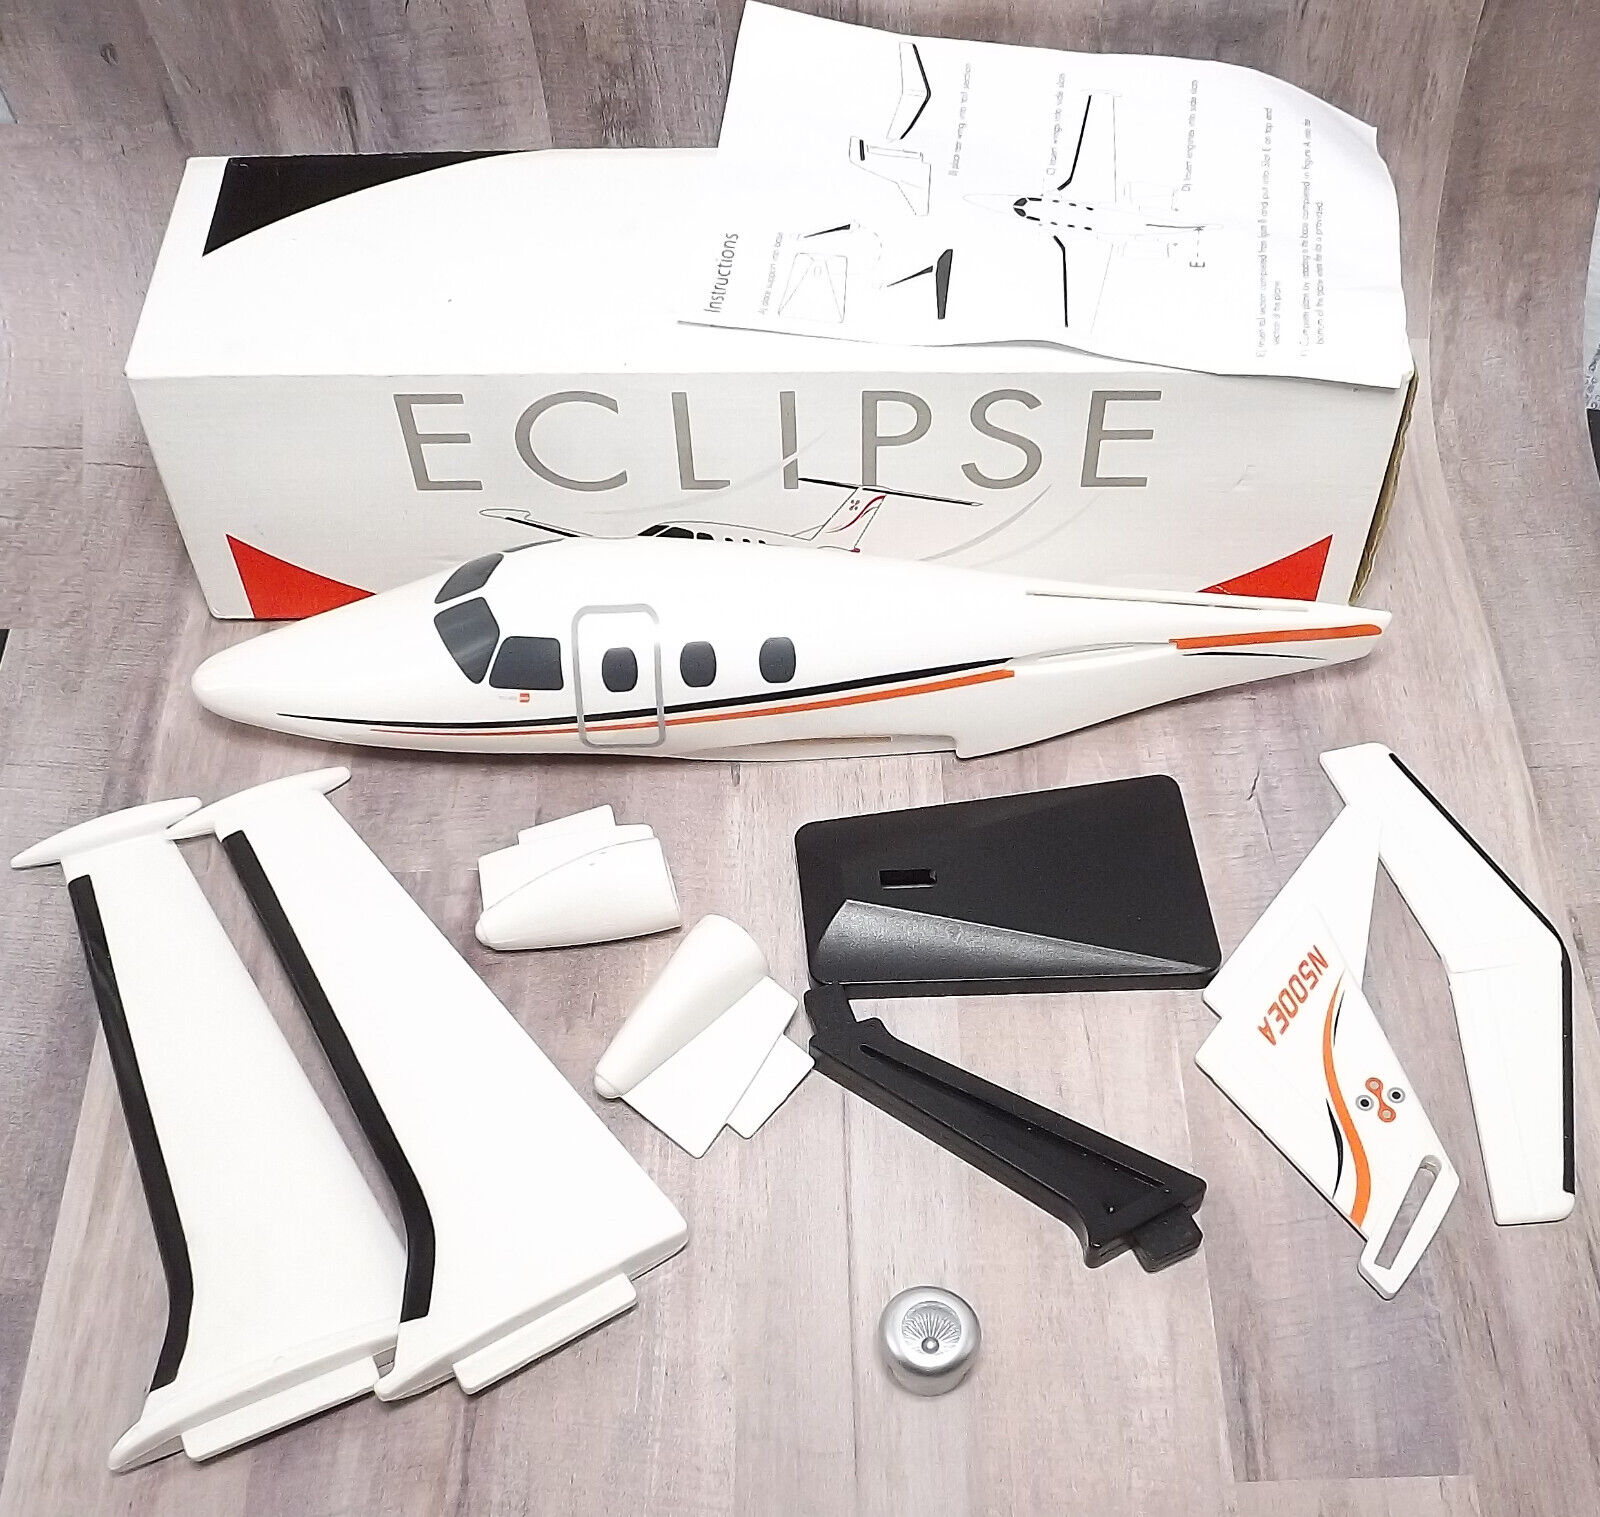 Rare Eclipse 500 Business Jet Model Kit - Missing one engine - Airplane Model